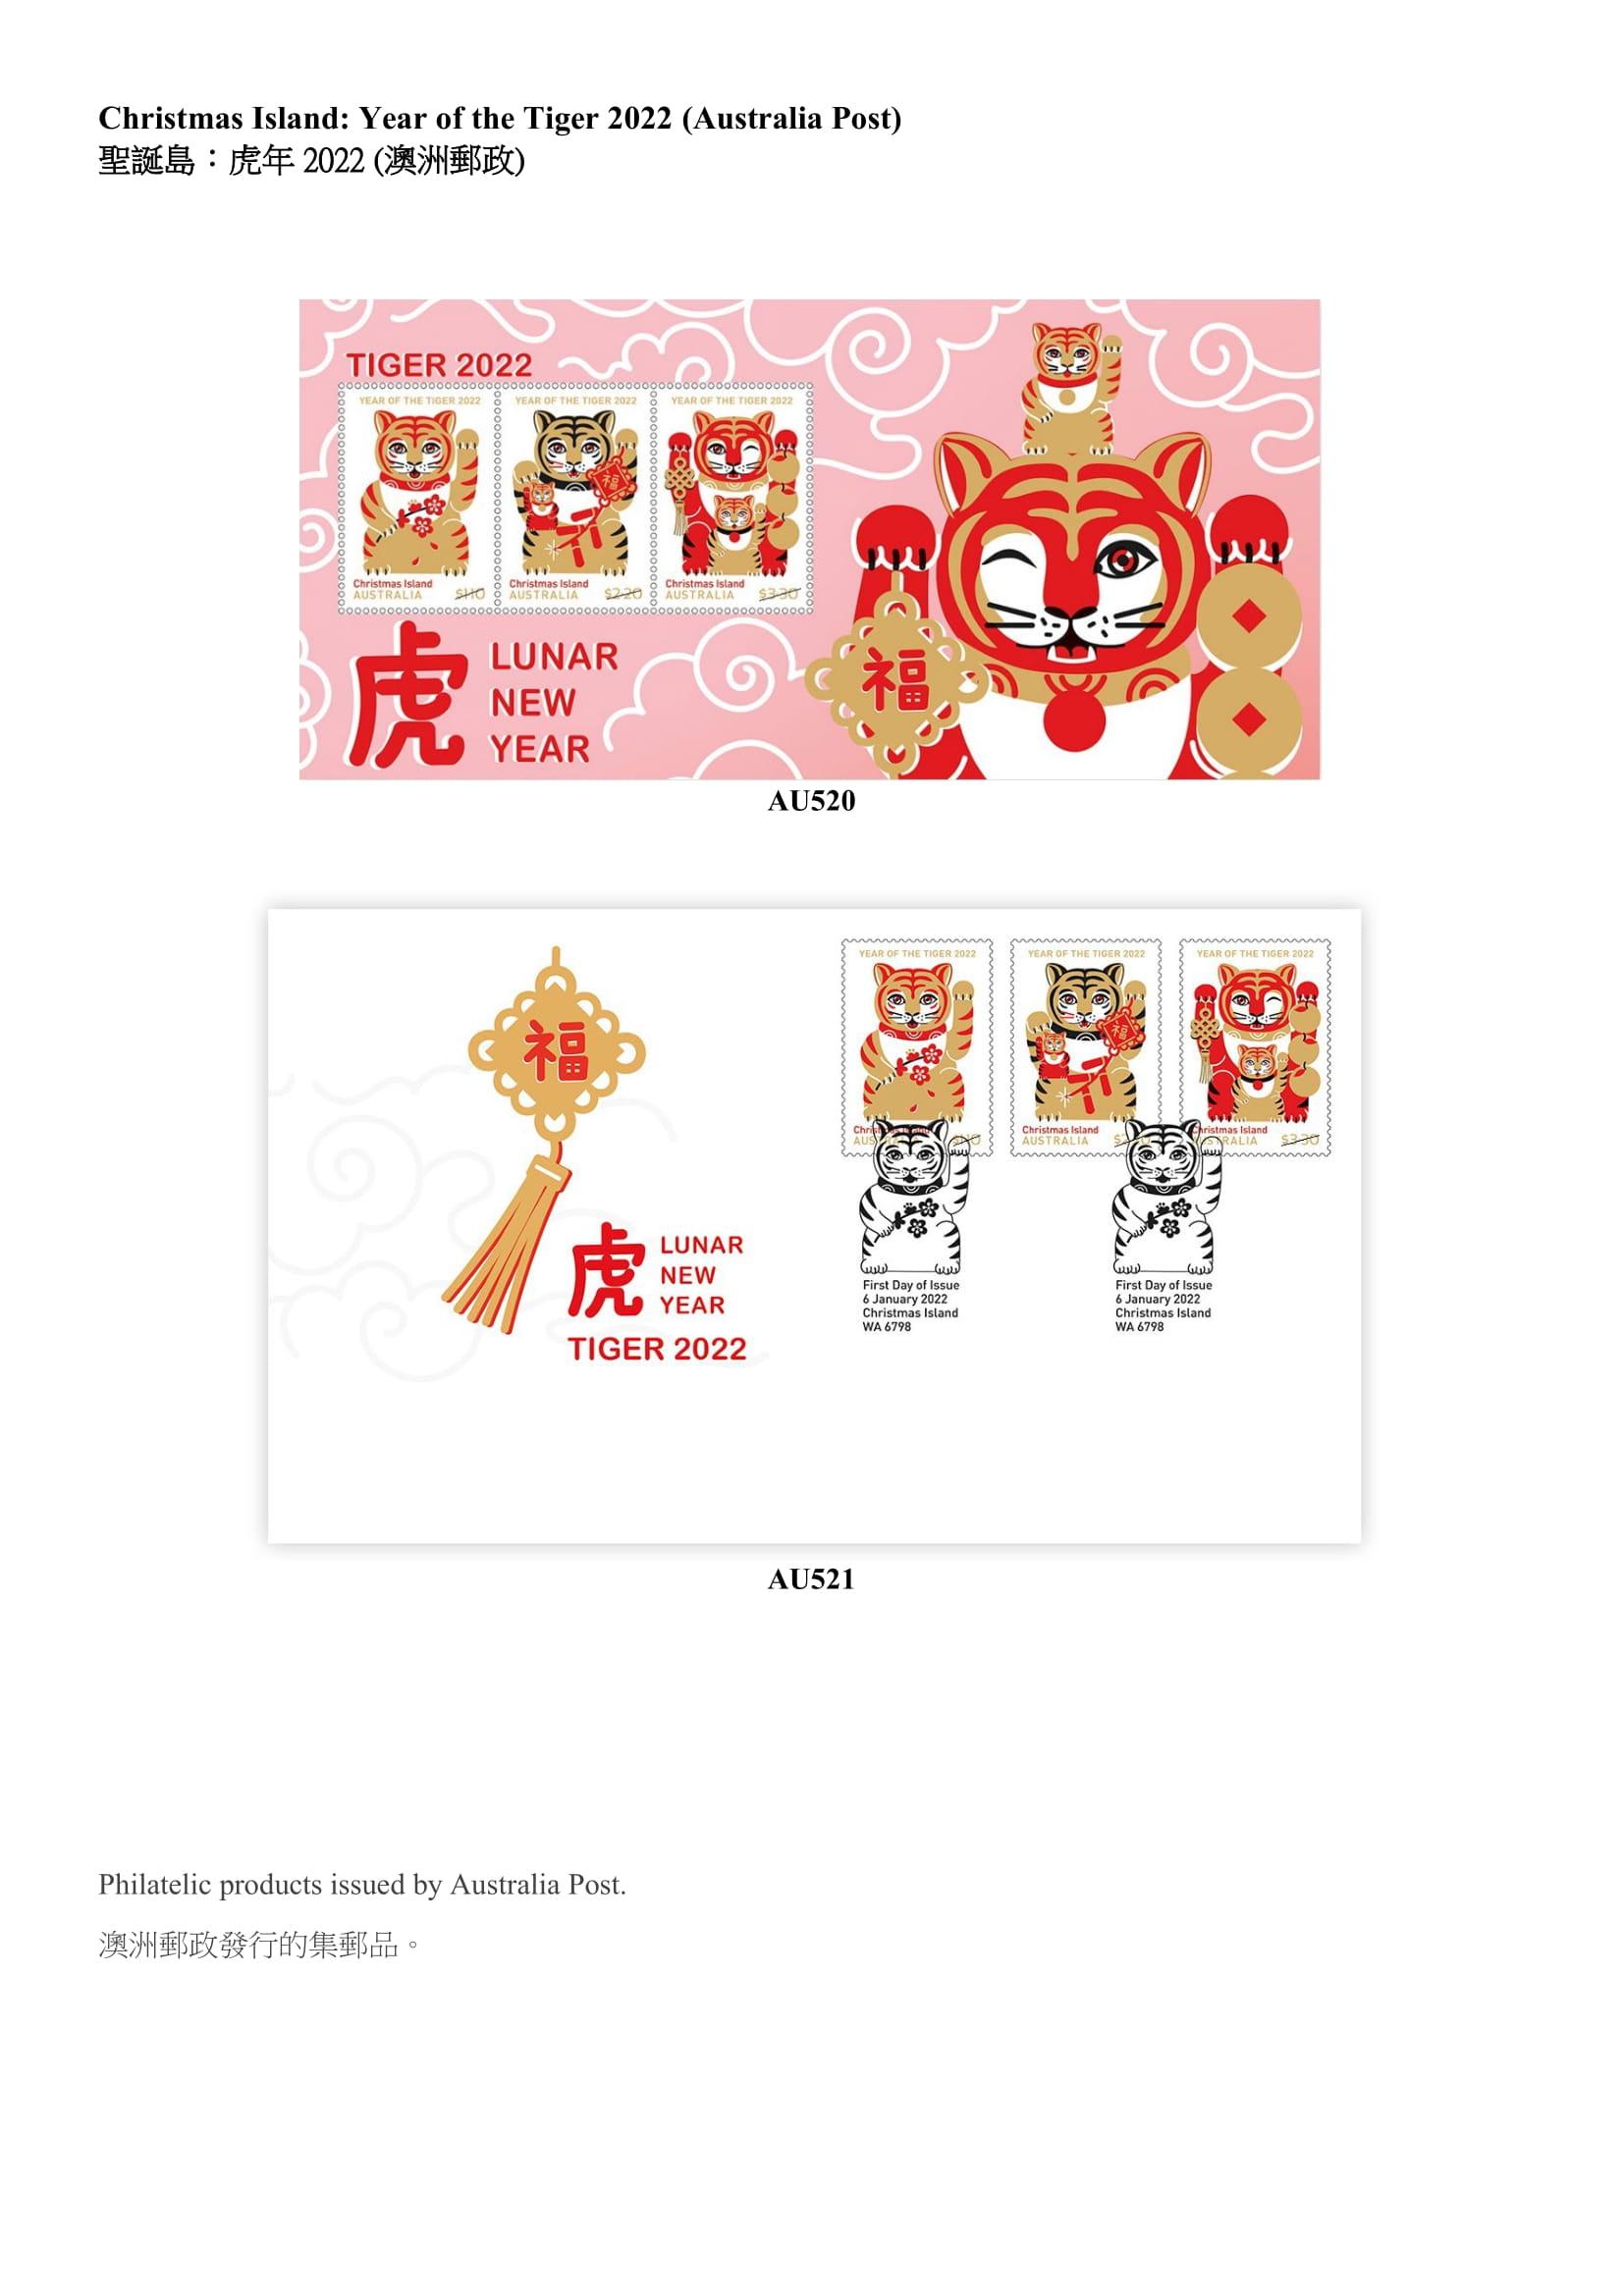 Hongkong Post announced today (March 4) that selected philatelic products issued by China Post, the Macao Post and Telecommunications Bureau and the overseas postal administrations of Australia, Isle of Man, Liechtenstein, New Zealand, the United Kingdom and the United Nations, will be put on sale at the Hongkong Post online shopping mall ShopThruPost starting from 8am on March 11. Picture shows philatelic products issued by Australia Post.

